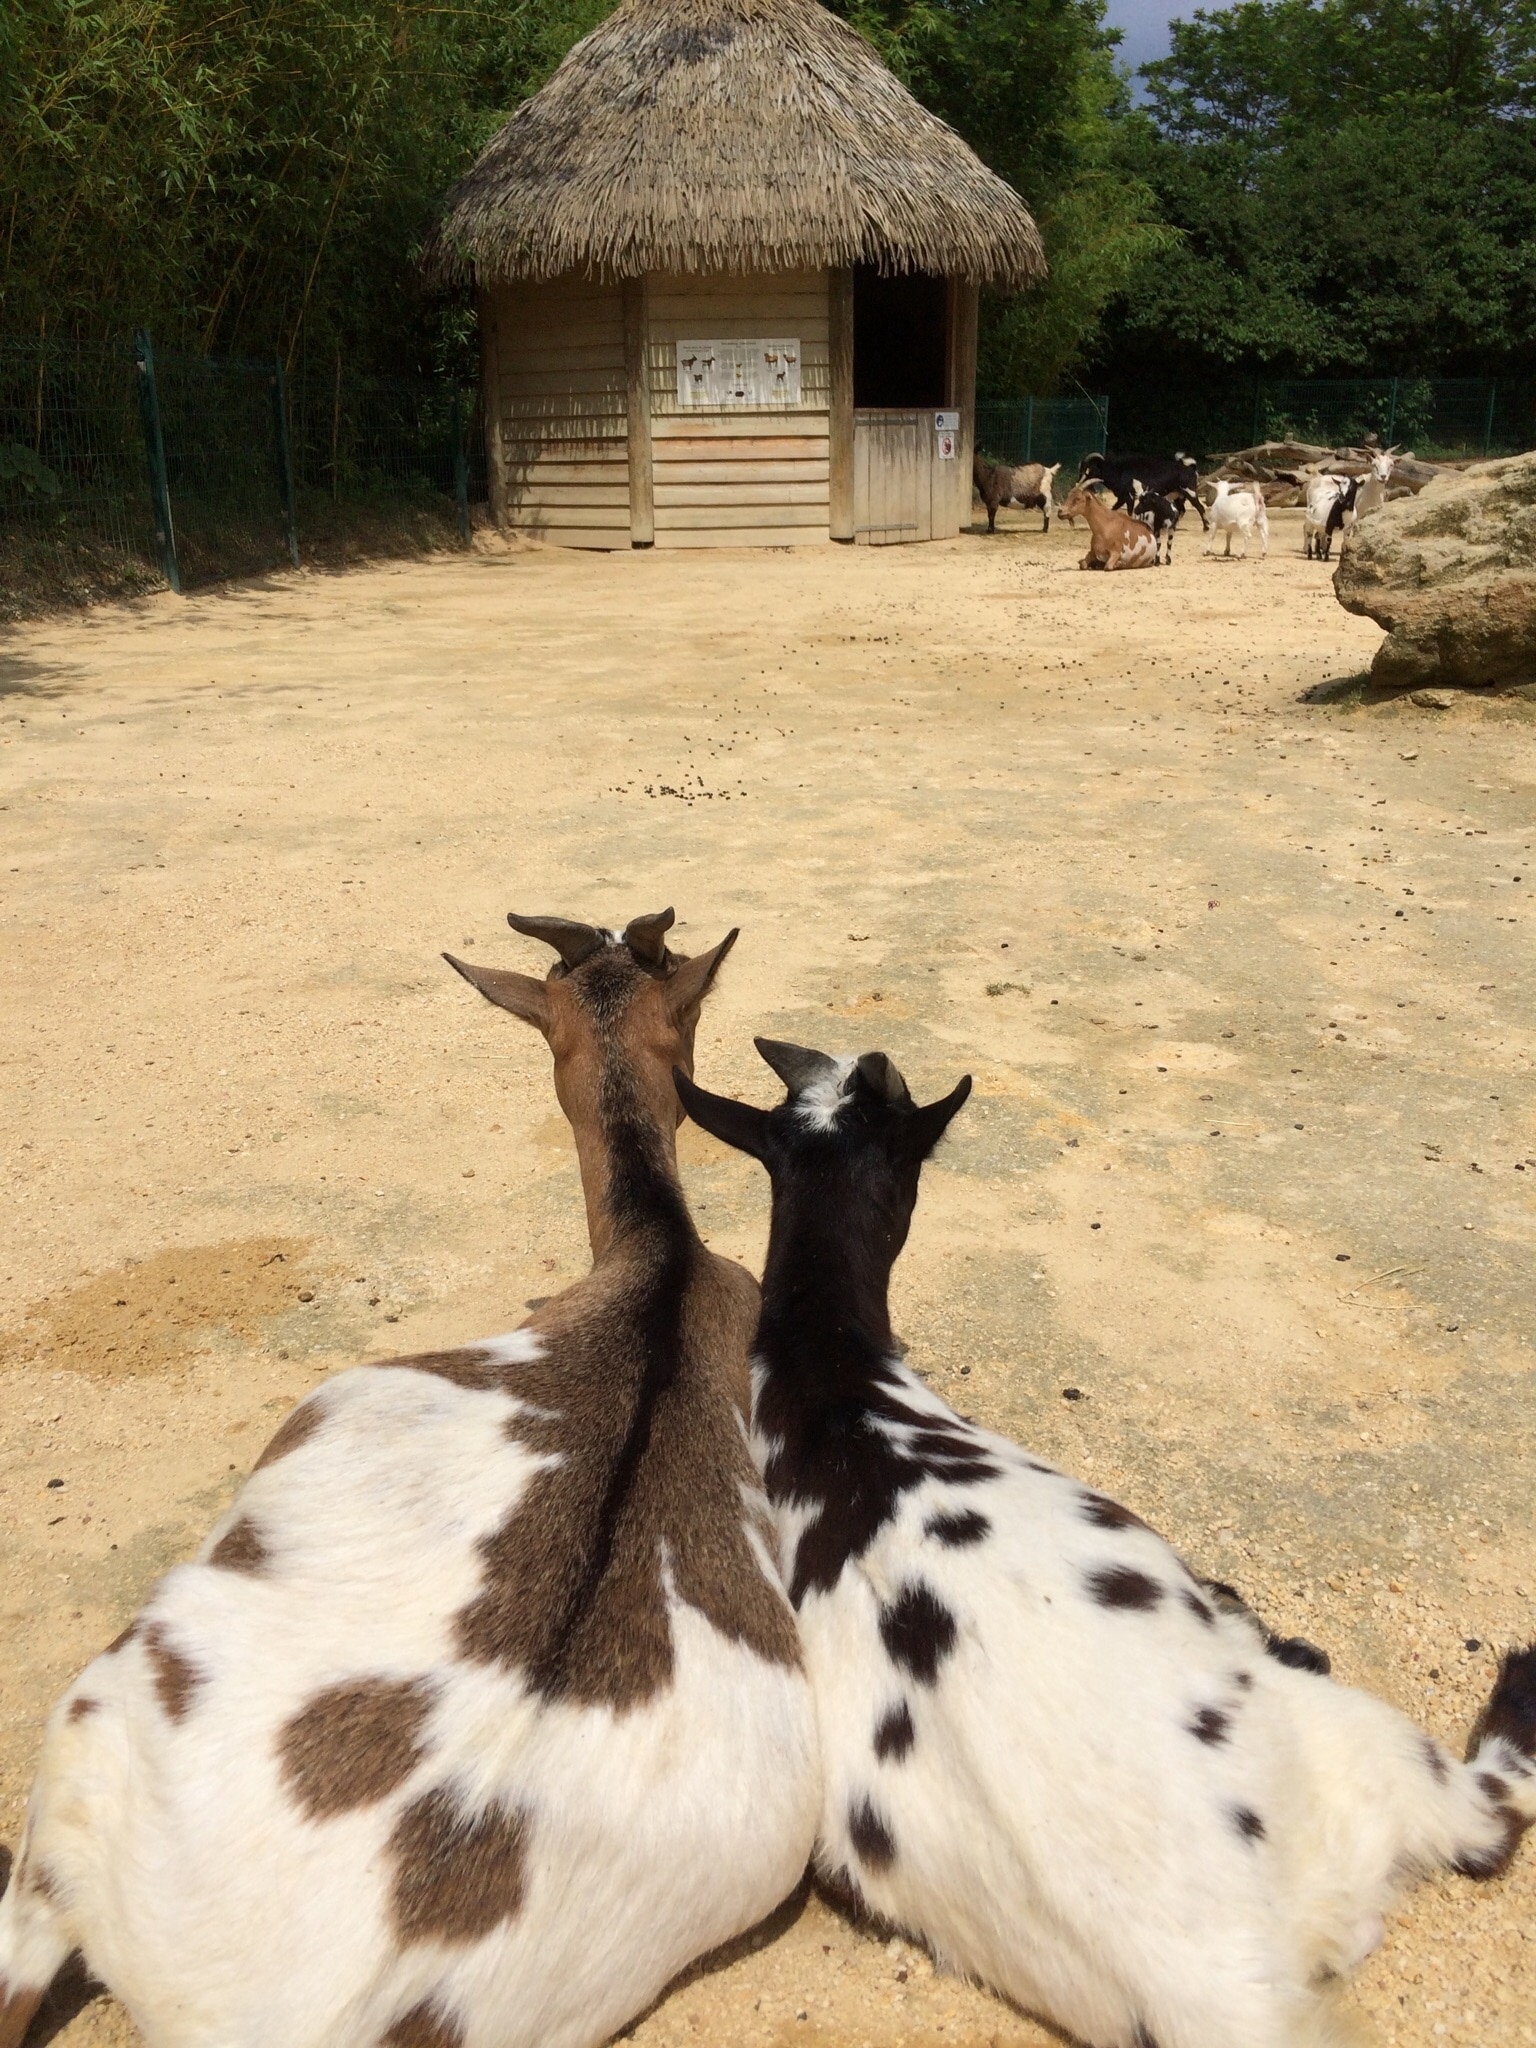 Two African goats getting cosy looking to their home in the distance. This zoo is the only troglodyte zoo in the world, with plenty of places to walk through with the animals.